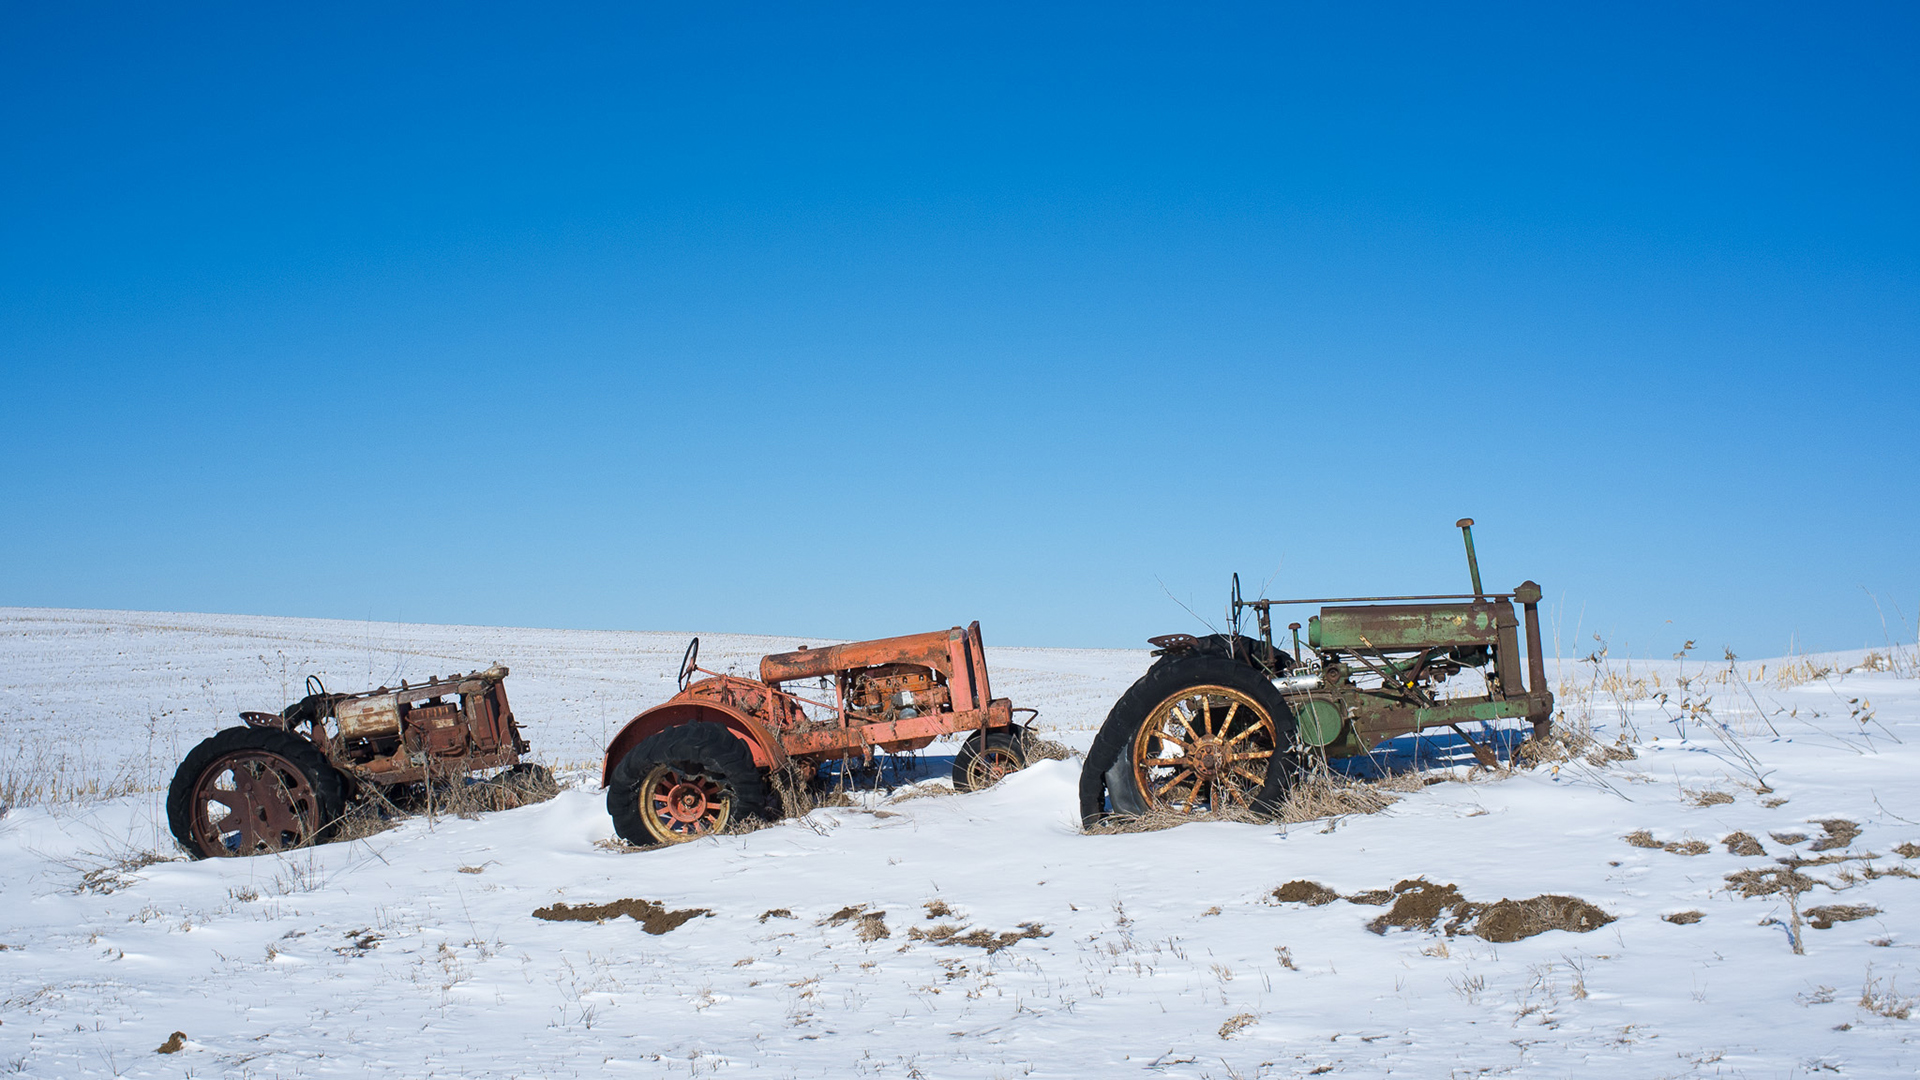 tractor, Snow, Winter, Rust, Abandon, Deserted, Landscapes, Vehicles, Sand, Snow, Winter, Rustic, Sky Wallpaper